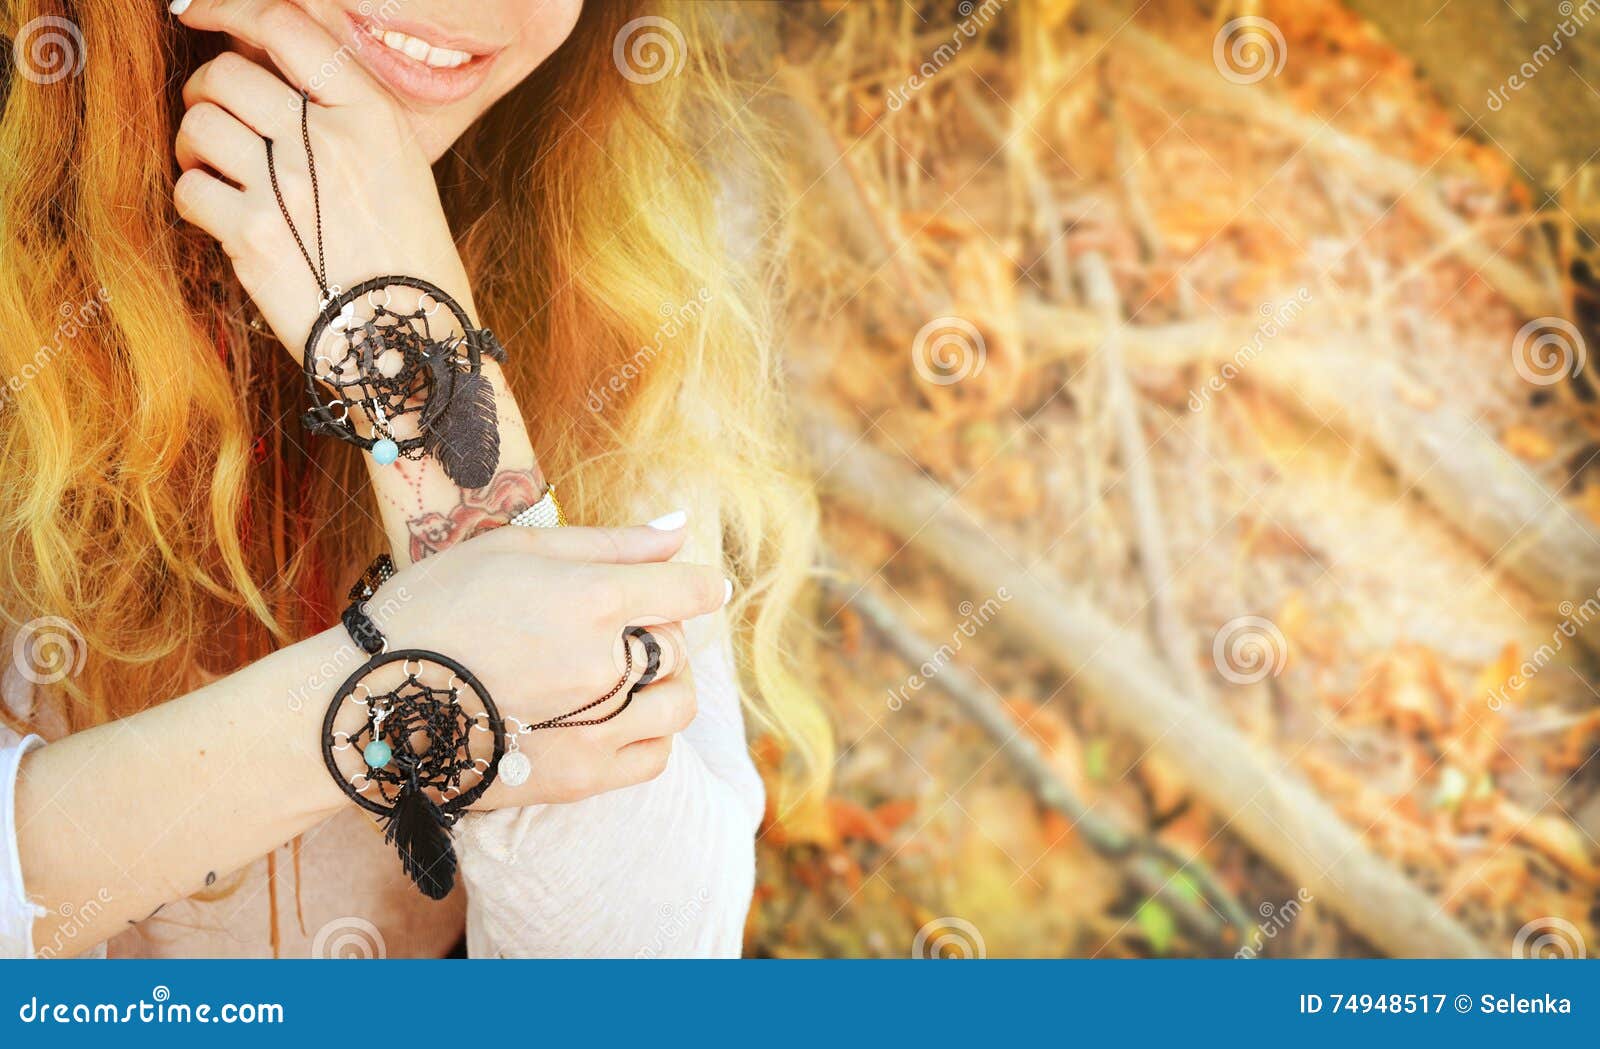 handcrafted bracelets on a woman hands, dreamcatcher jewelry, close up